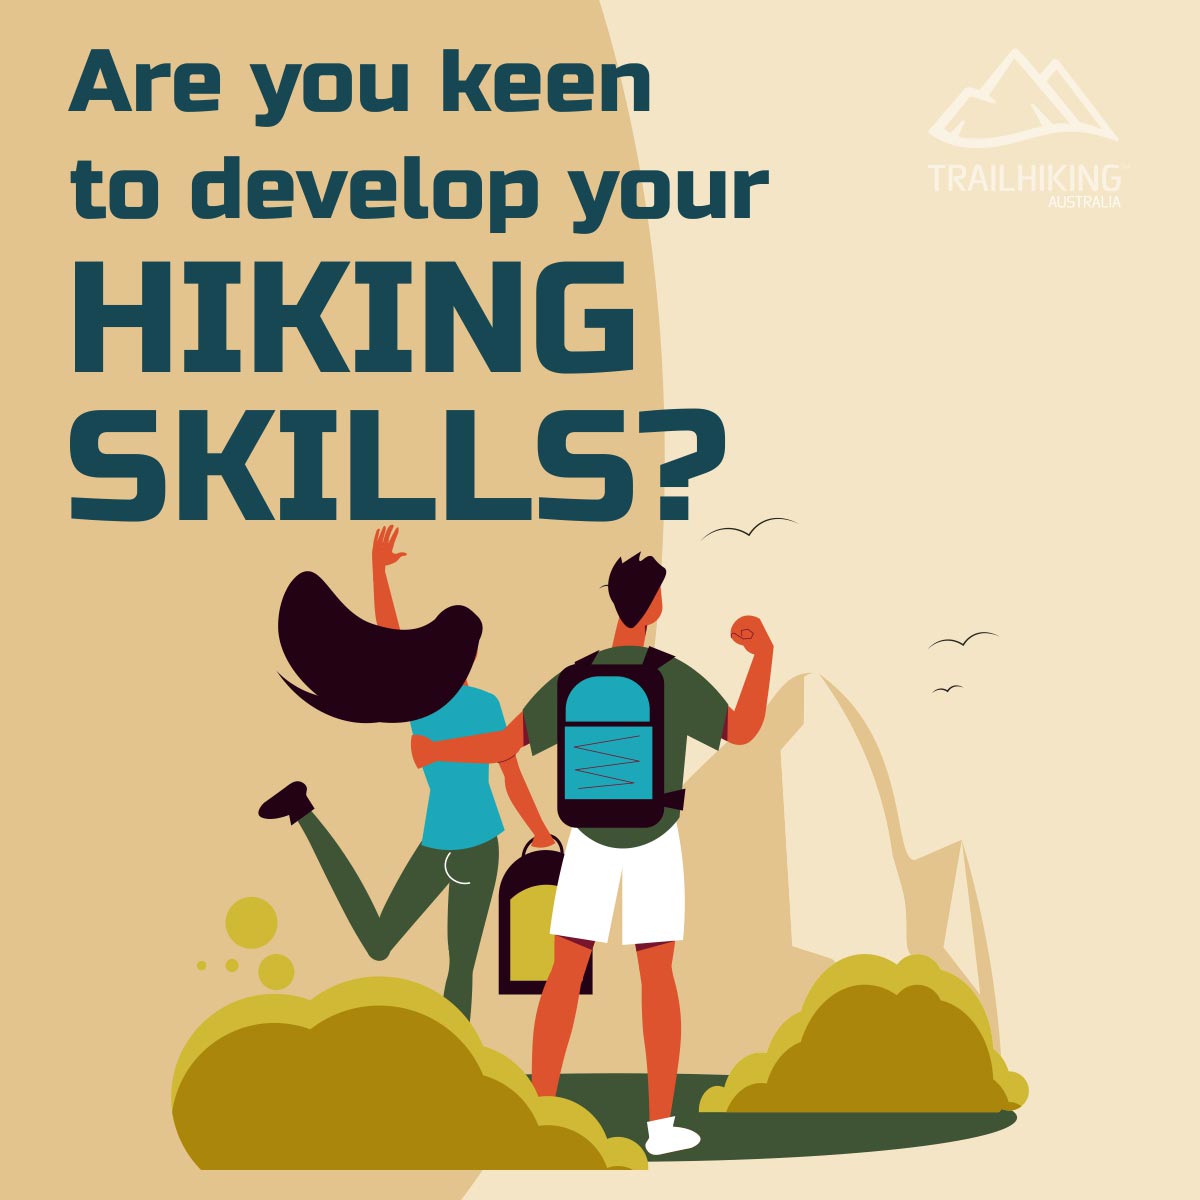 Develop your hiking skills